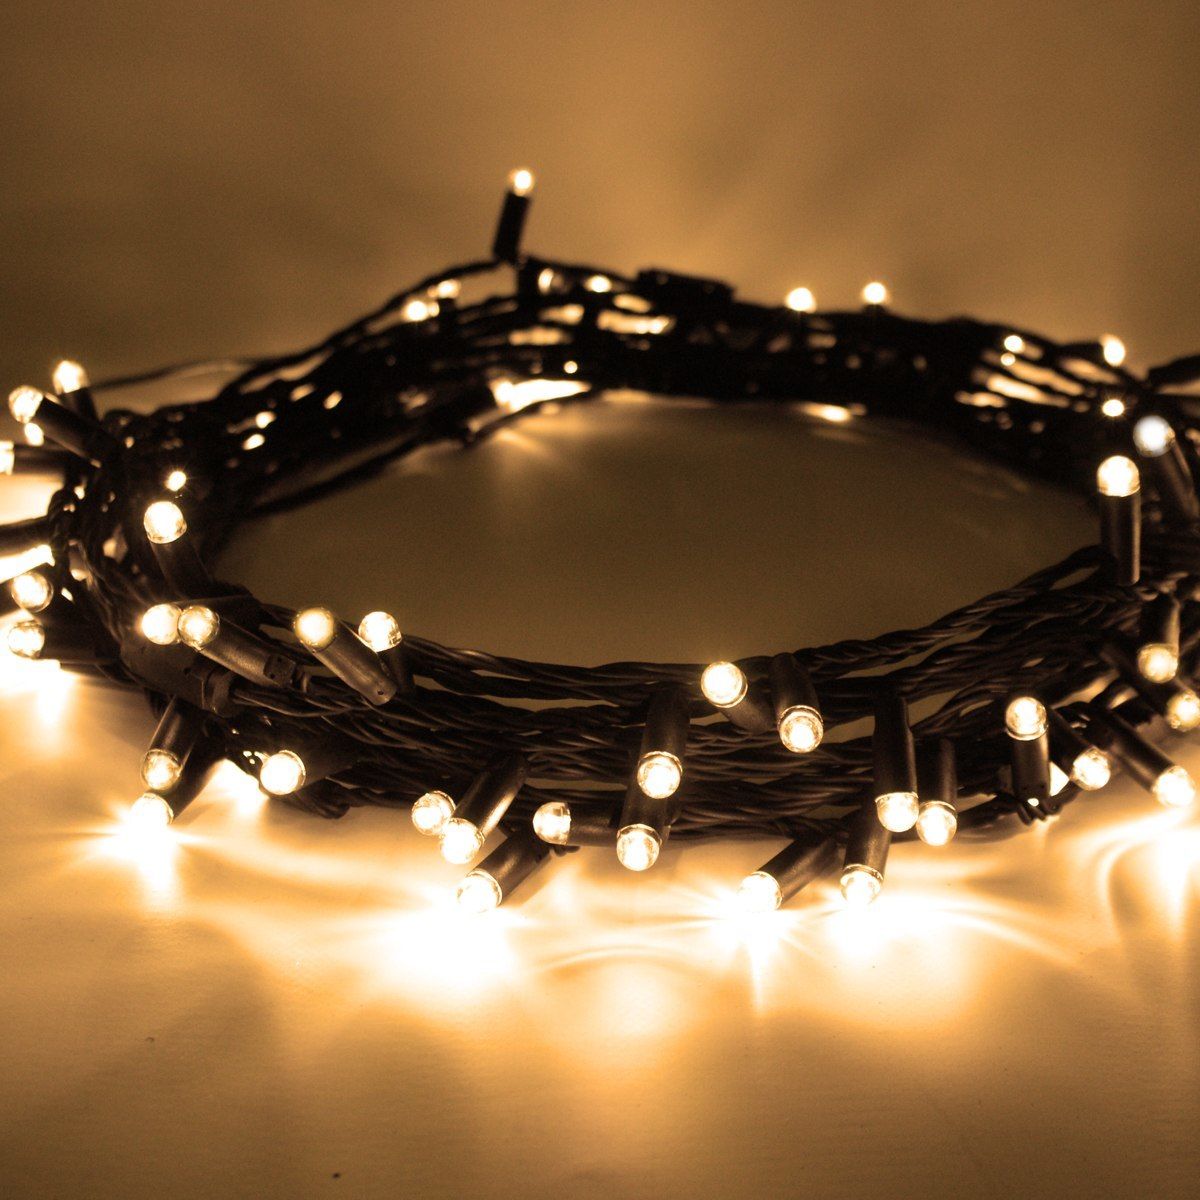 ConnectGo Outdoor LED String Lights, Low Voltage (31v) Connectable, Black Rubber Cable